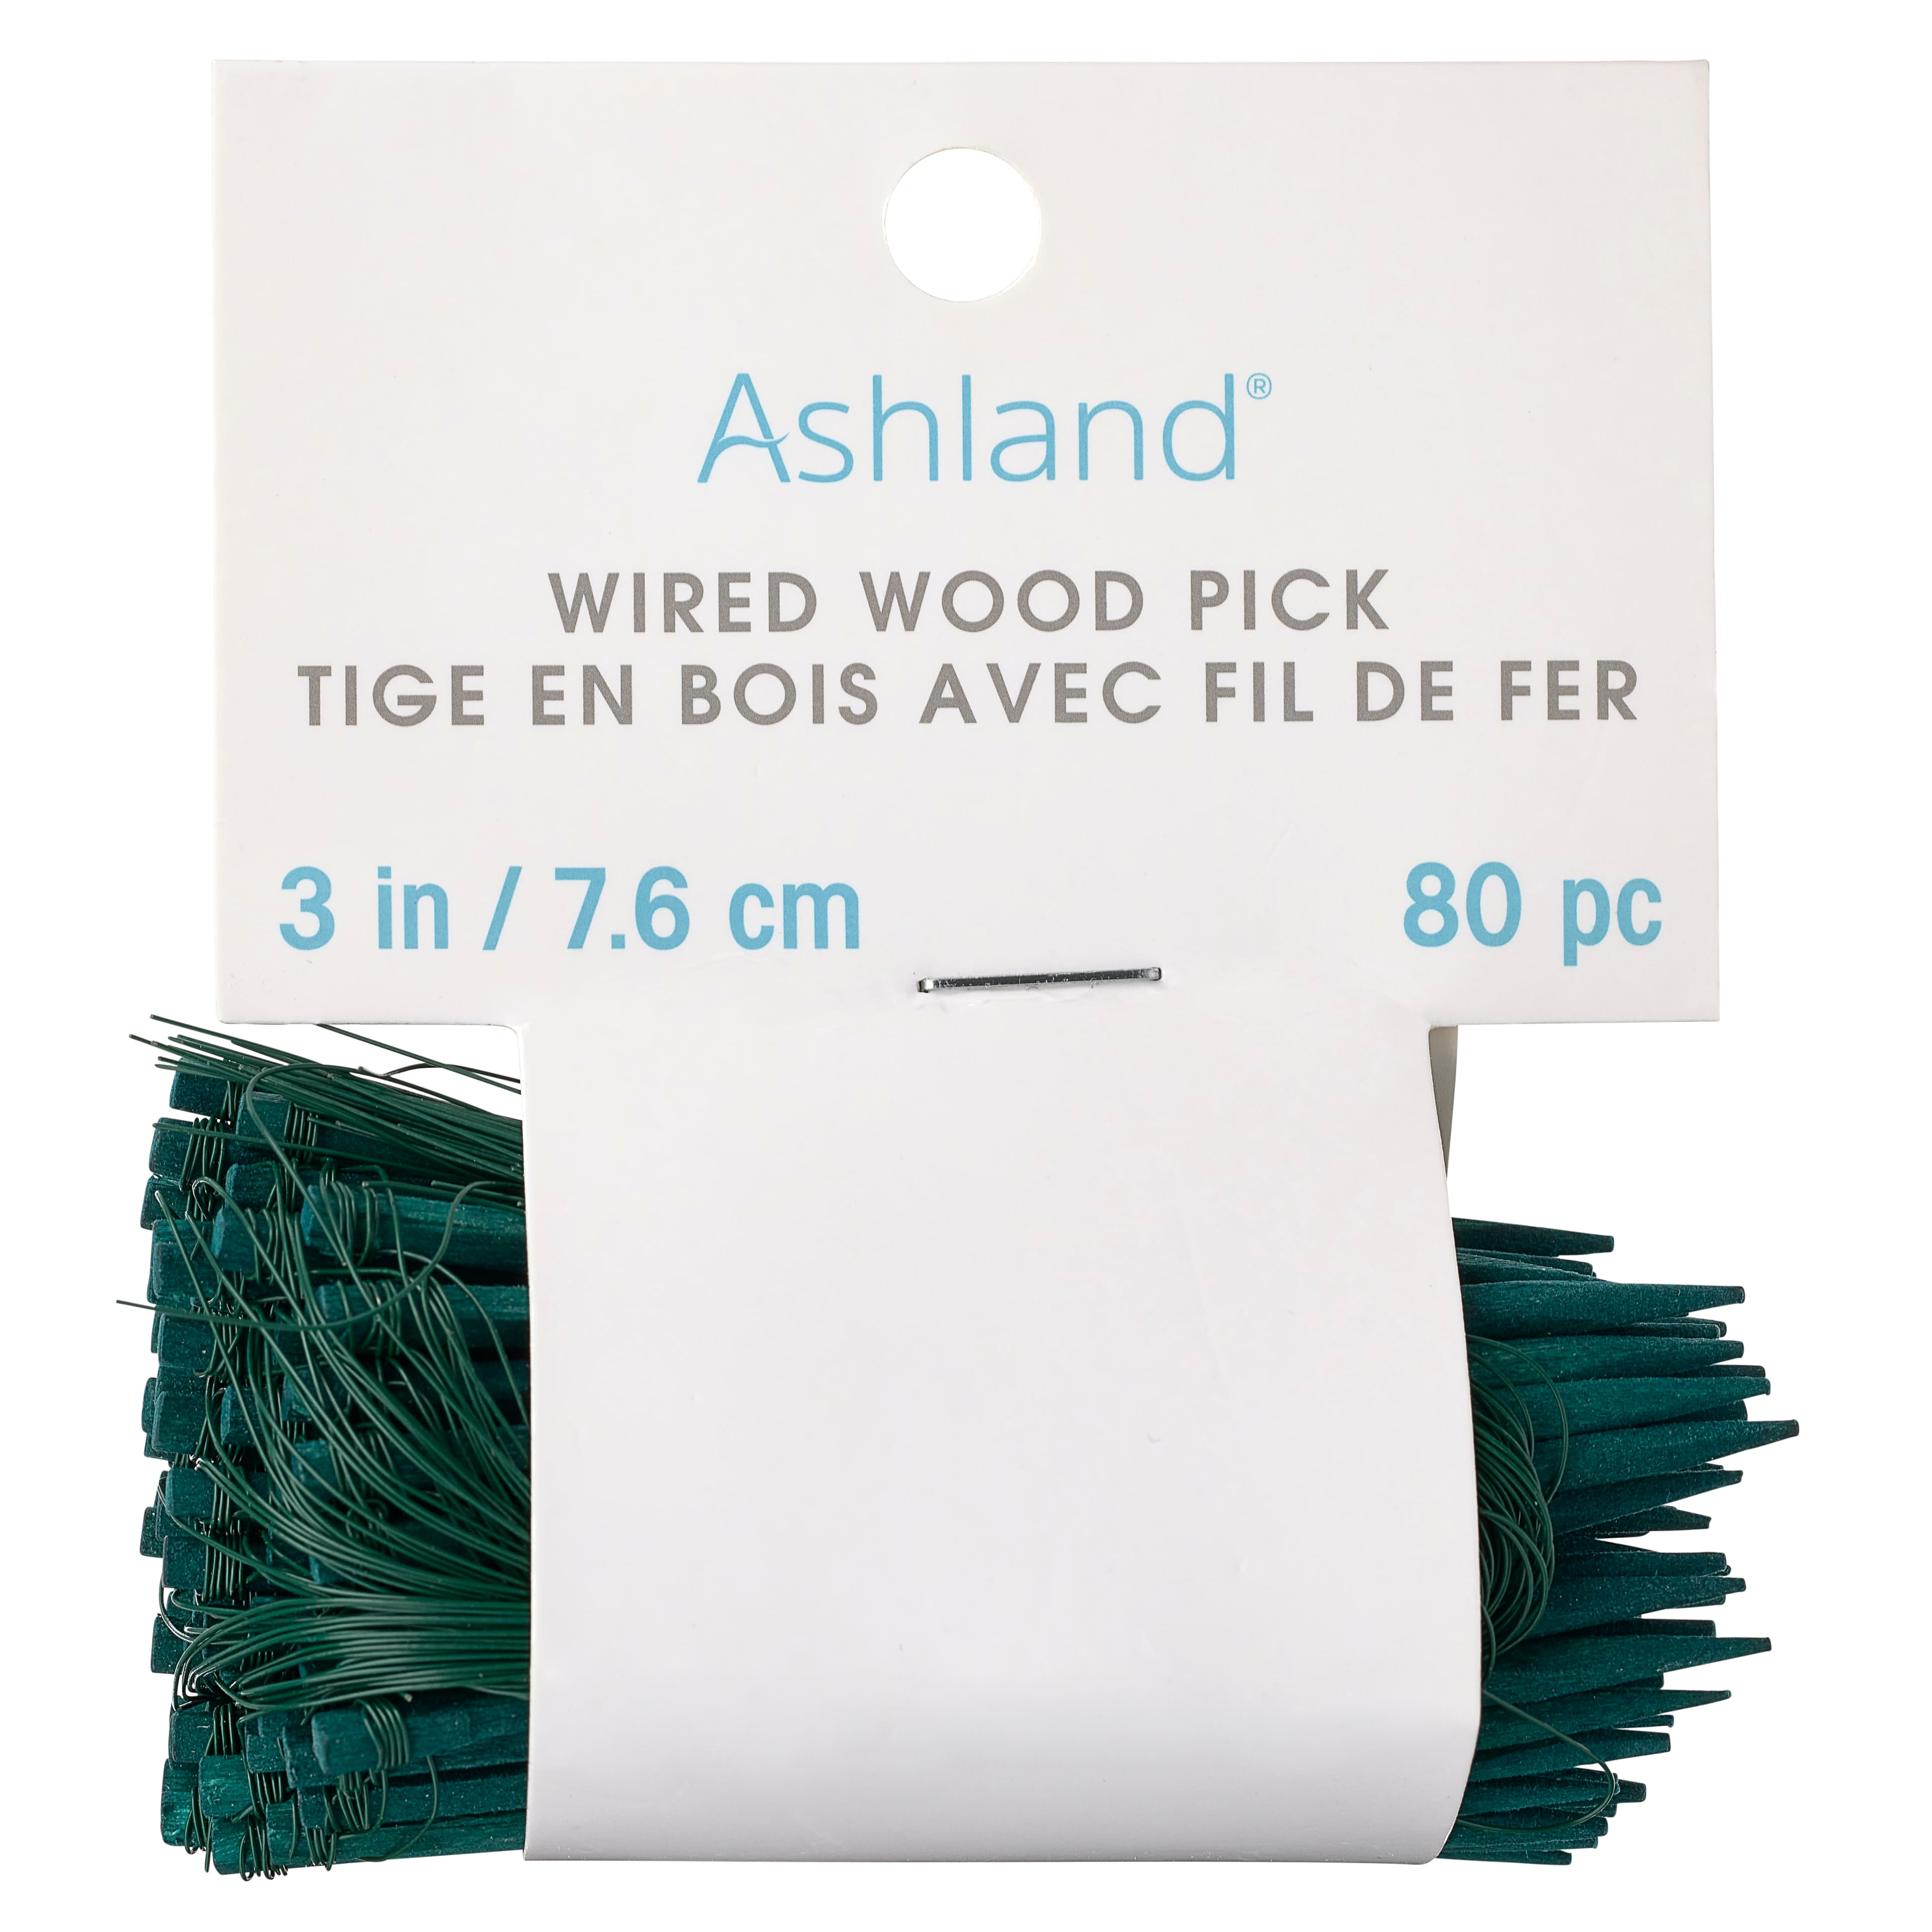 Wired Wood Picks by Ashland™